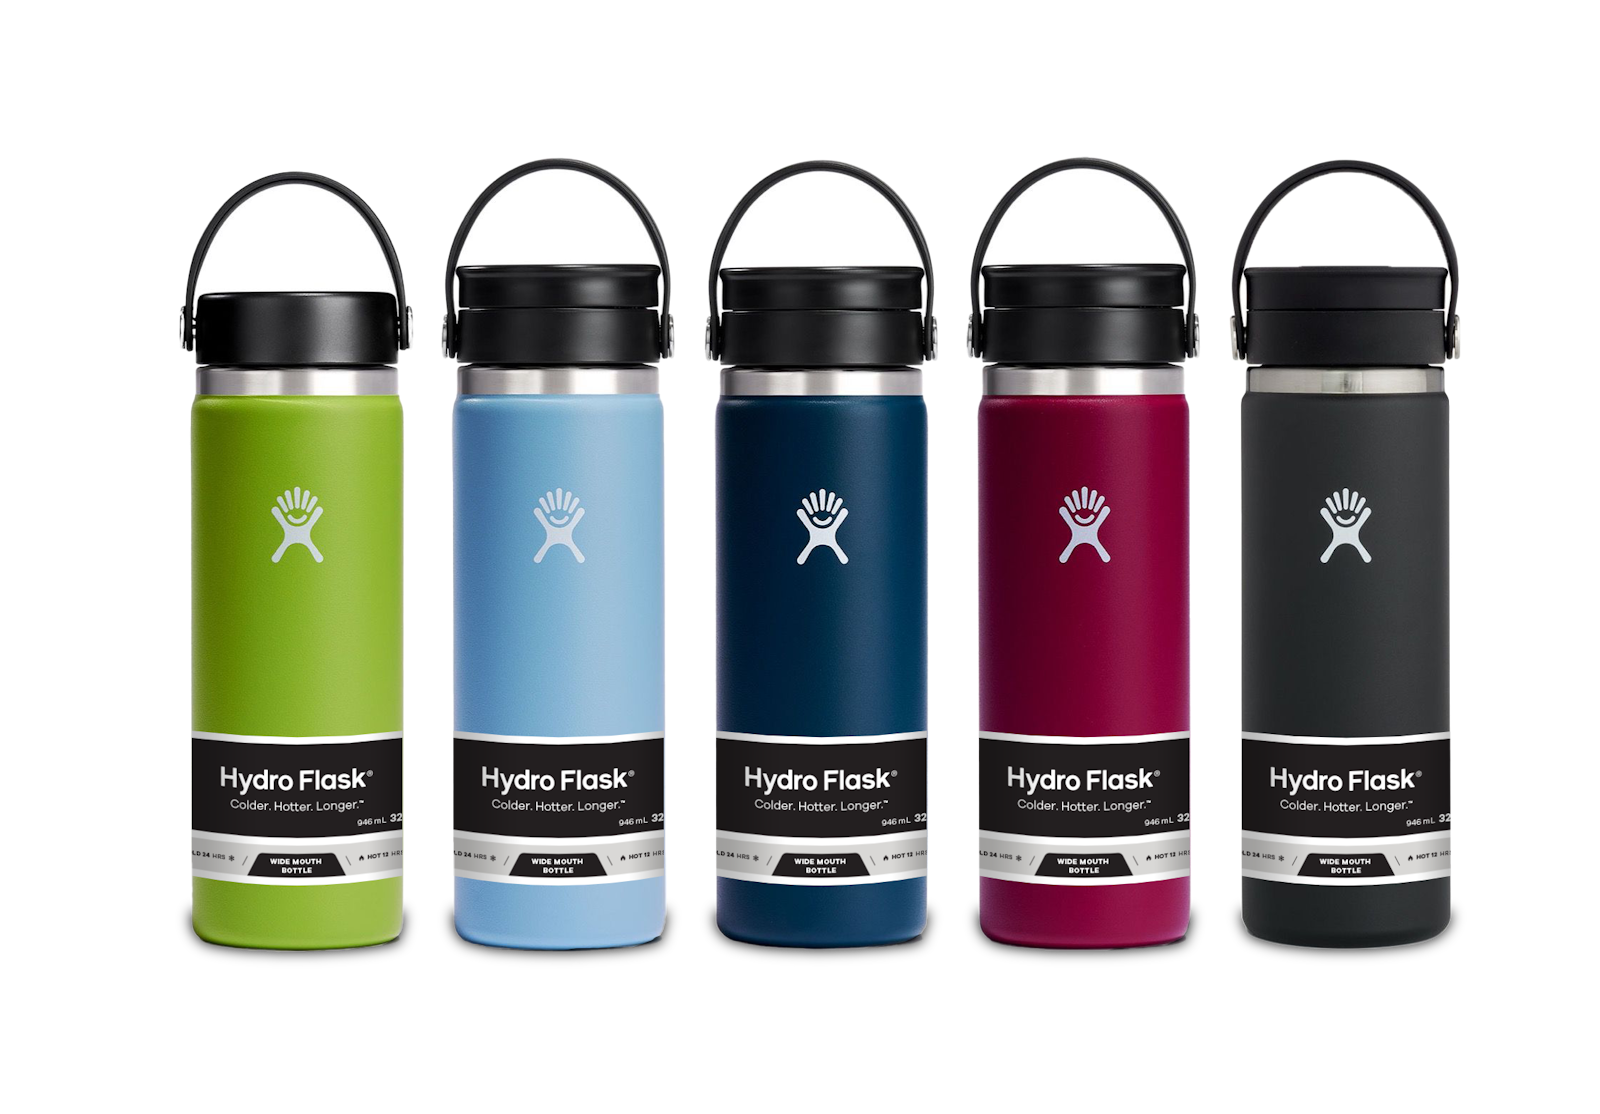 A set of five Hydro Flask brand design bottles in various colors on transparent background.